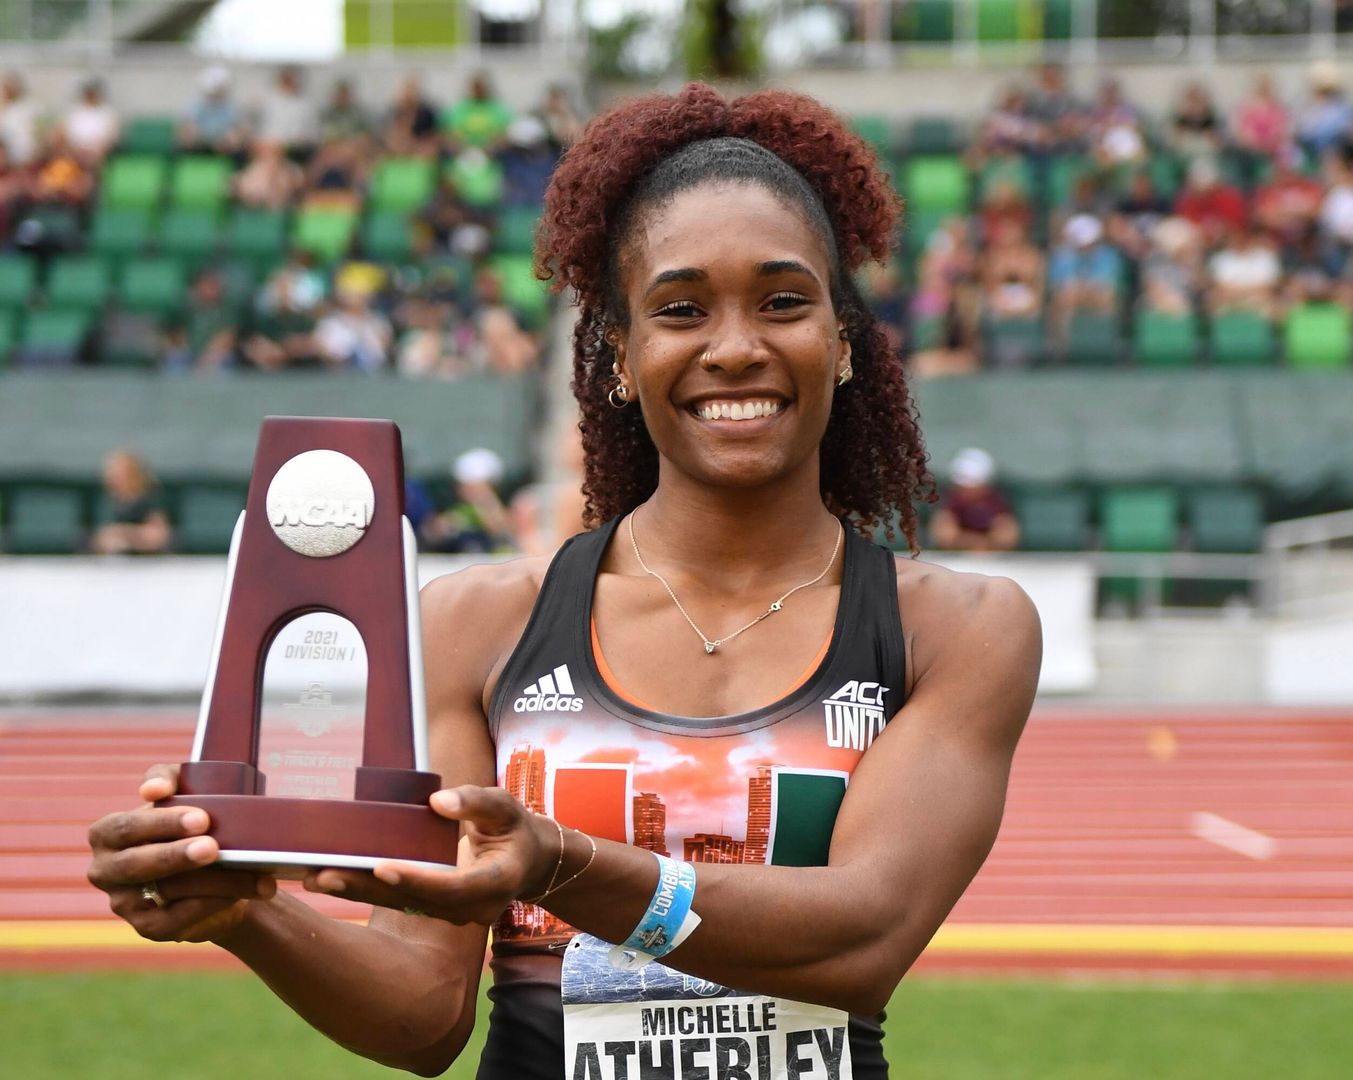 Atherley Named ACC Field Performer of the Year